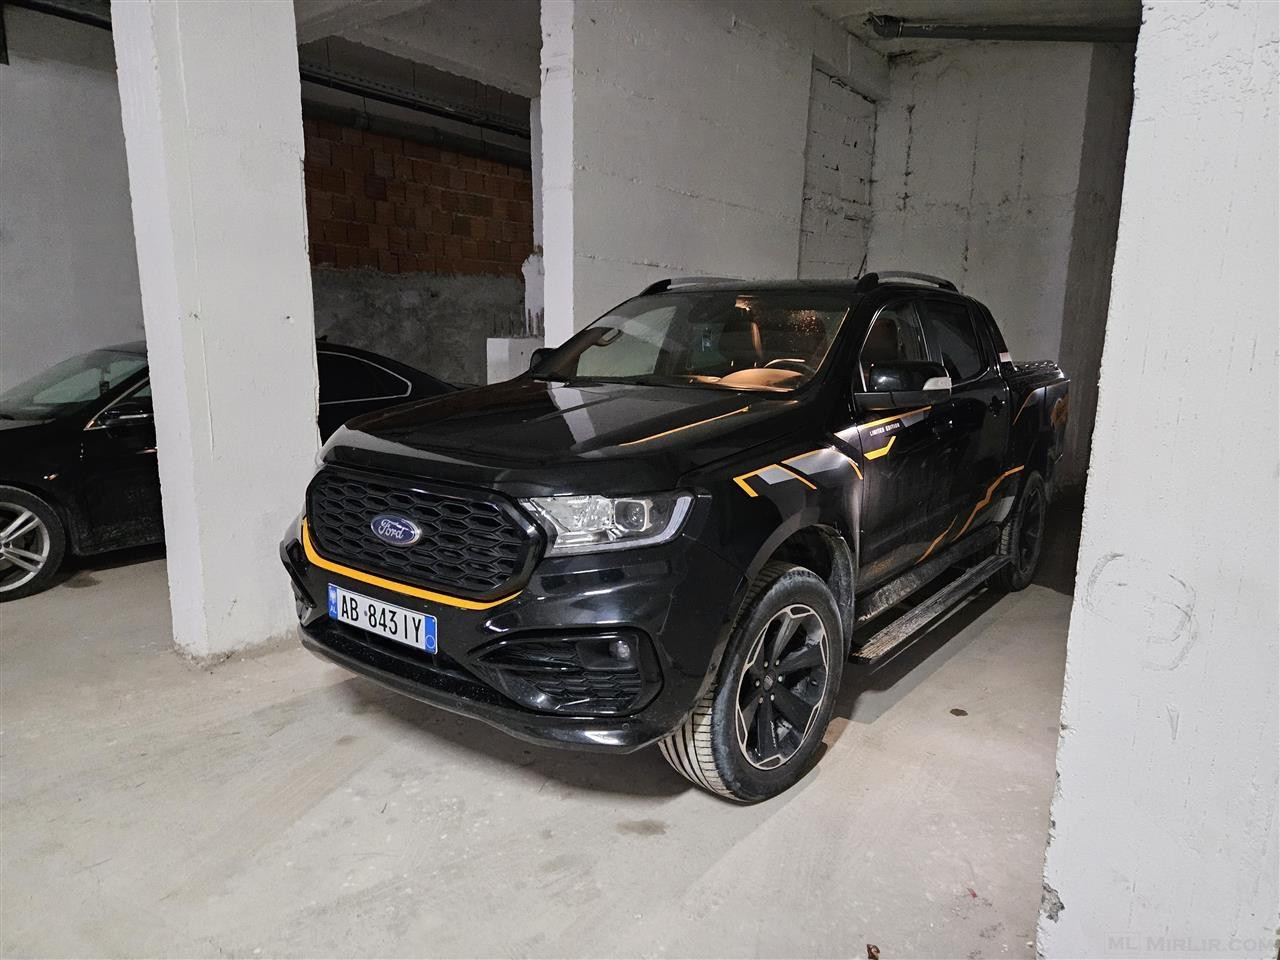 Ford Ranger MS-RT Limited Edition